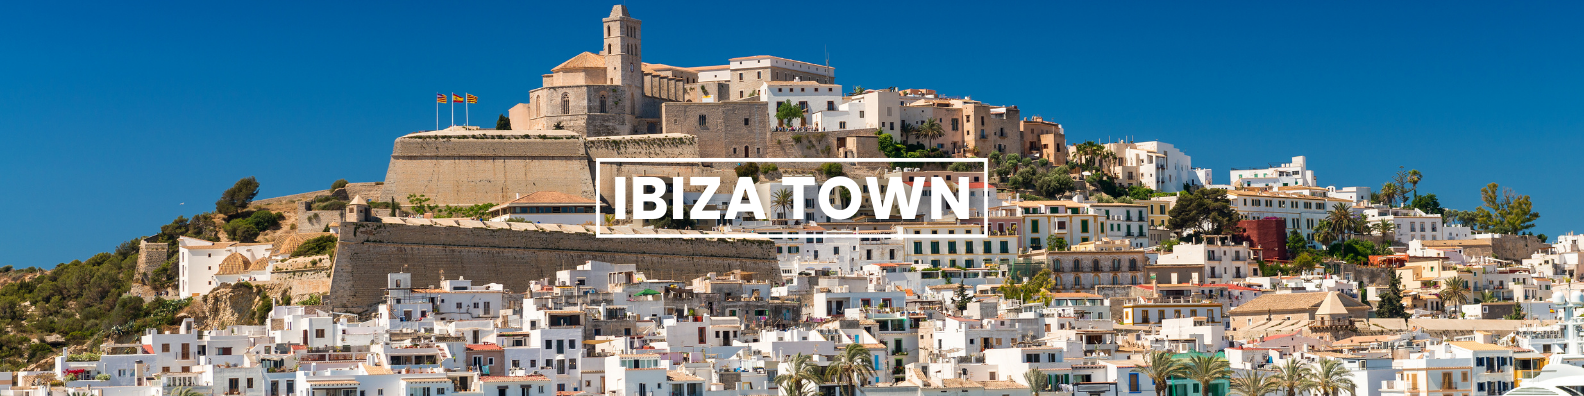 a blurred image of a city with the words ibiza town written on it